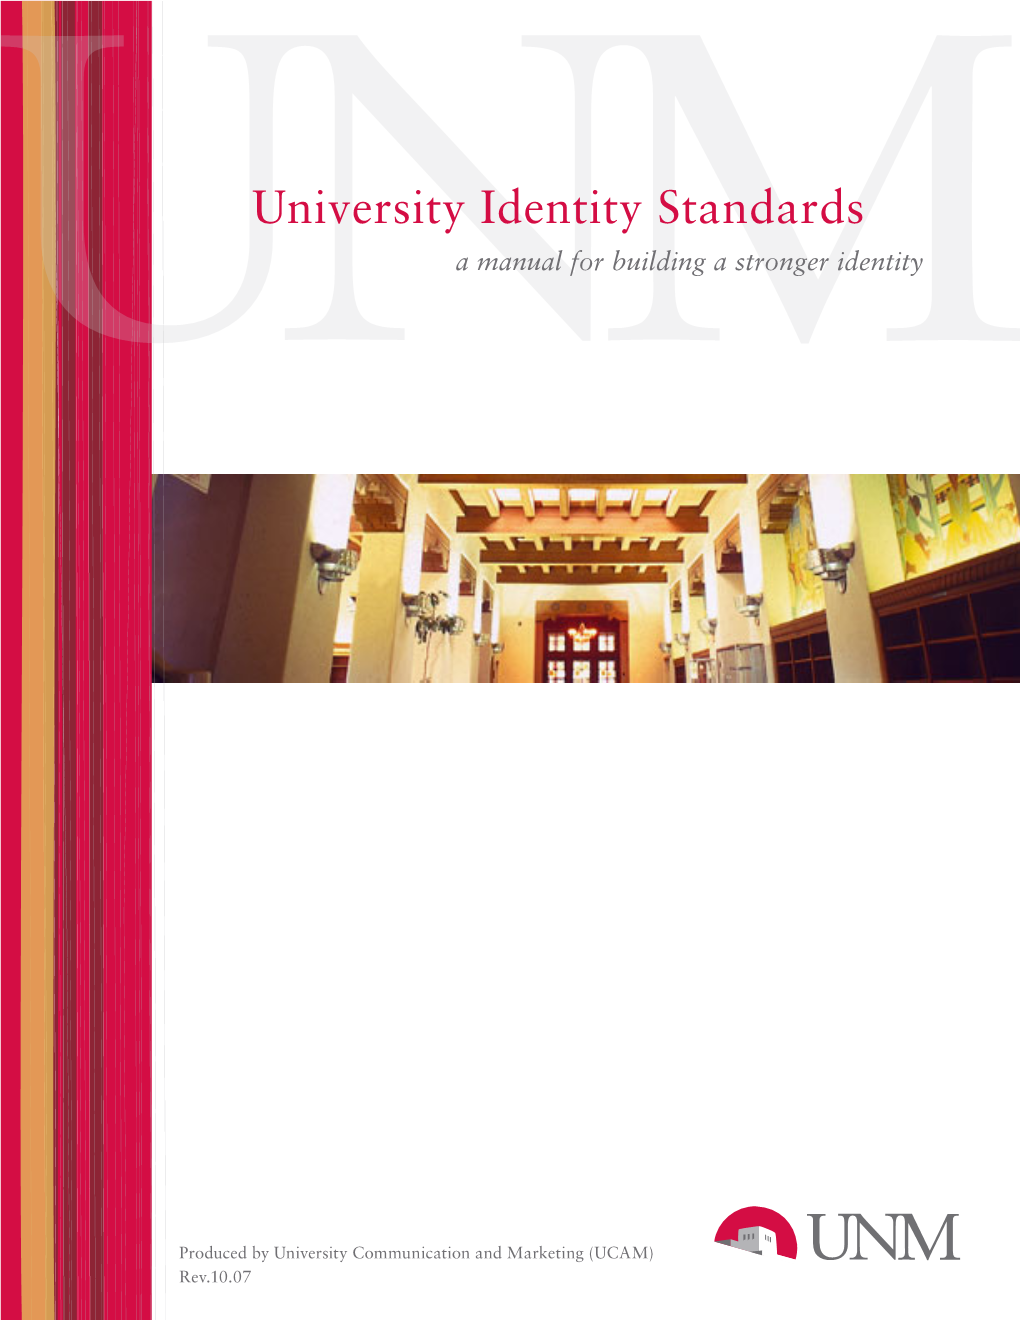 University Identity Standards a Manual for Building a Stronger Identity